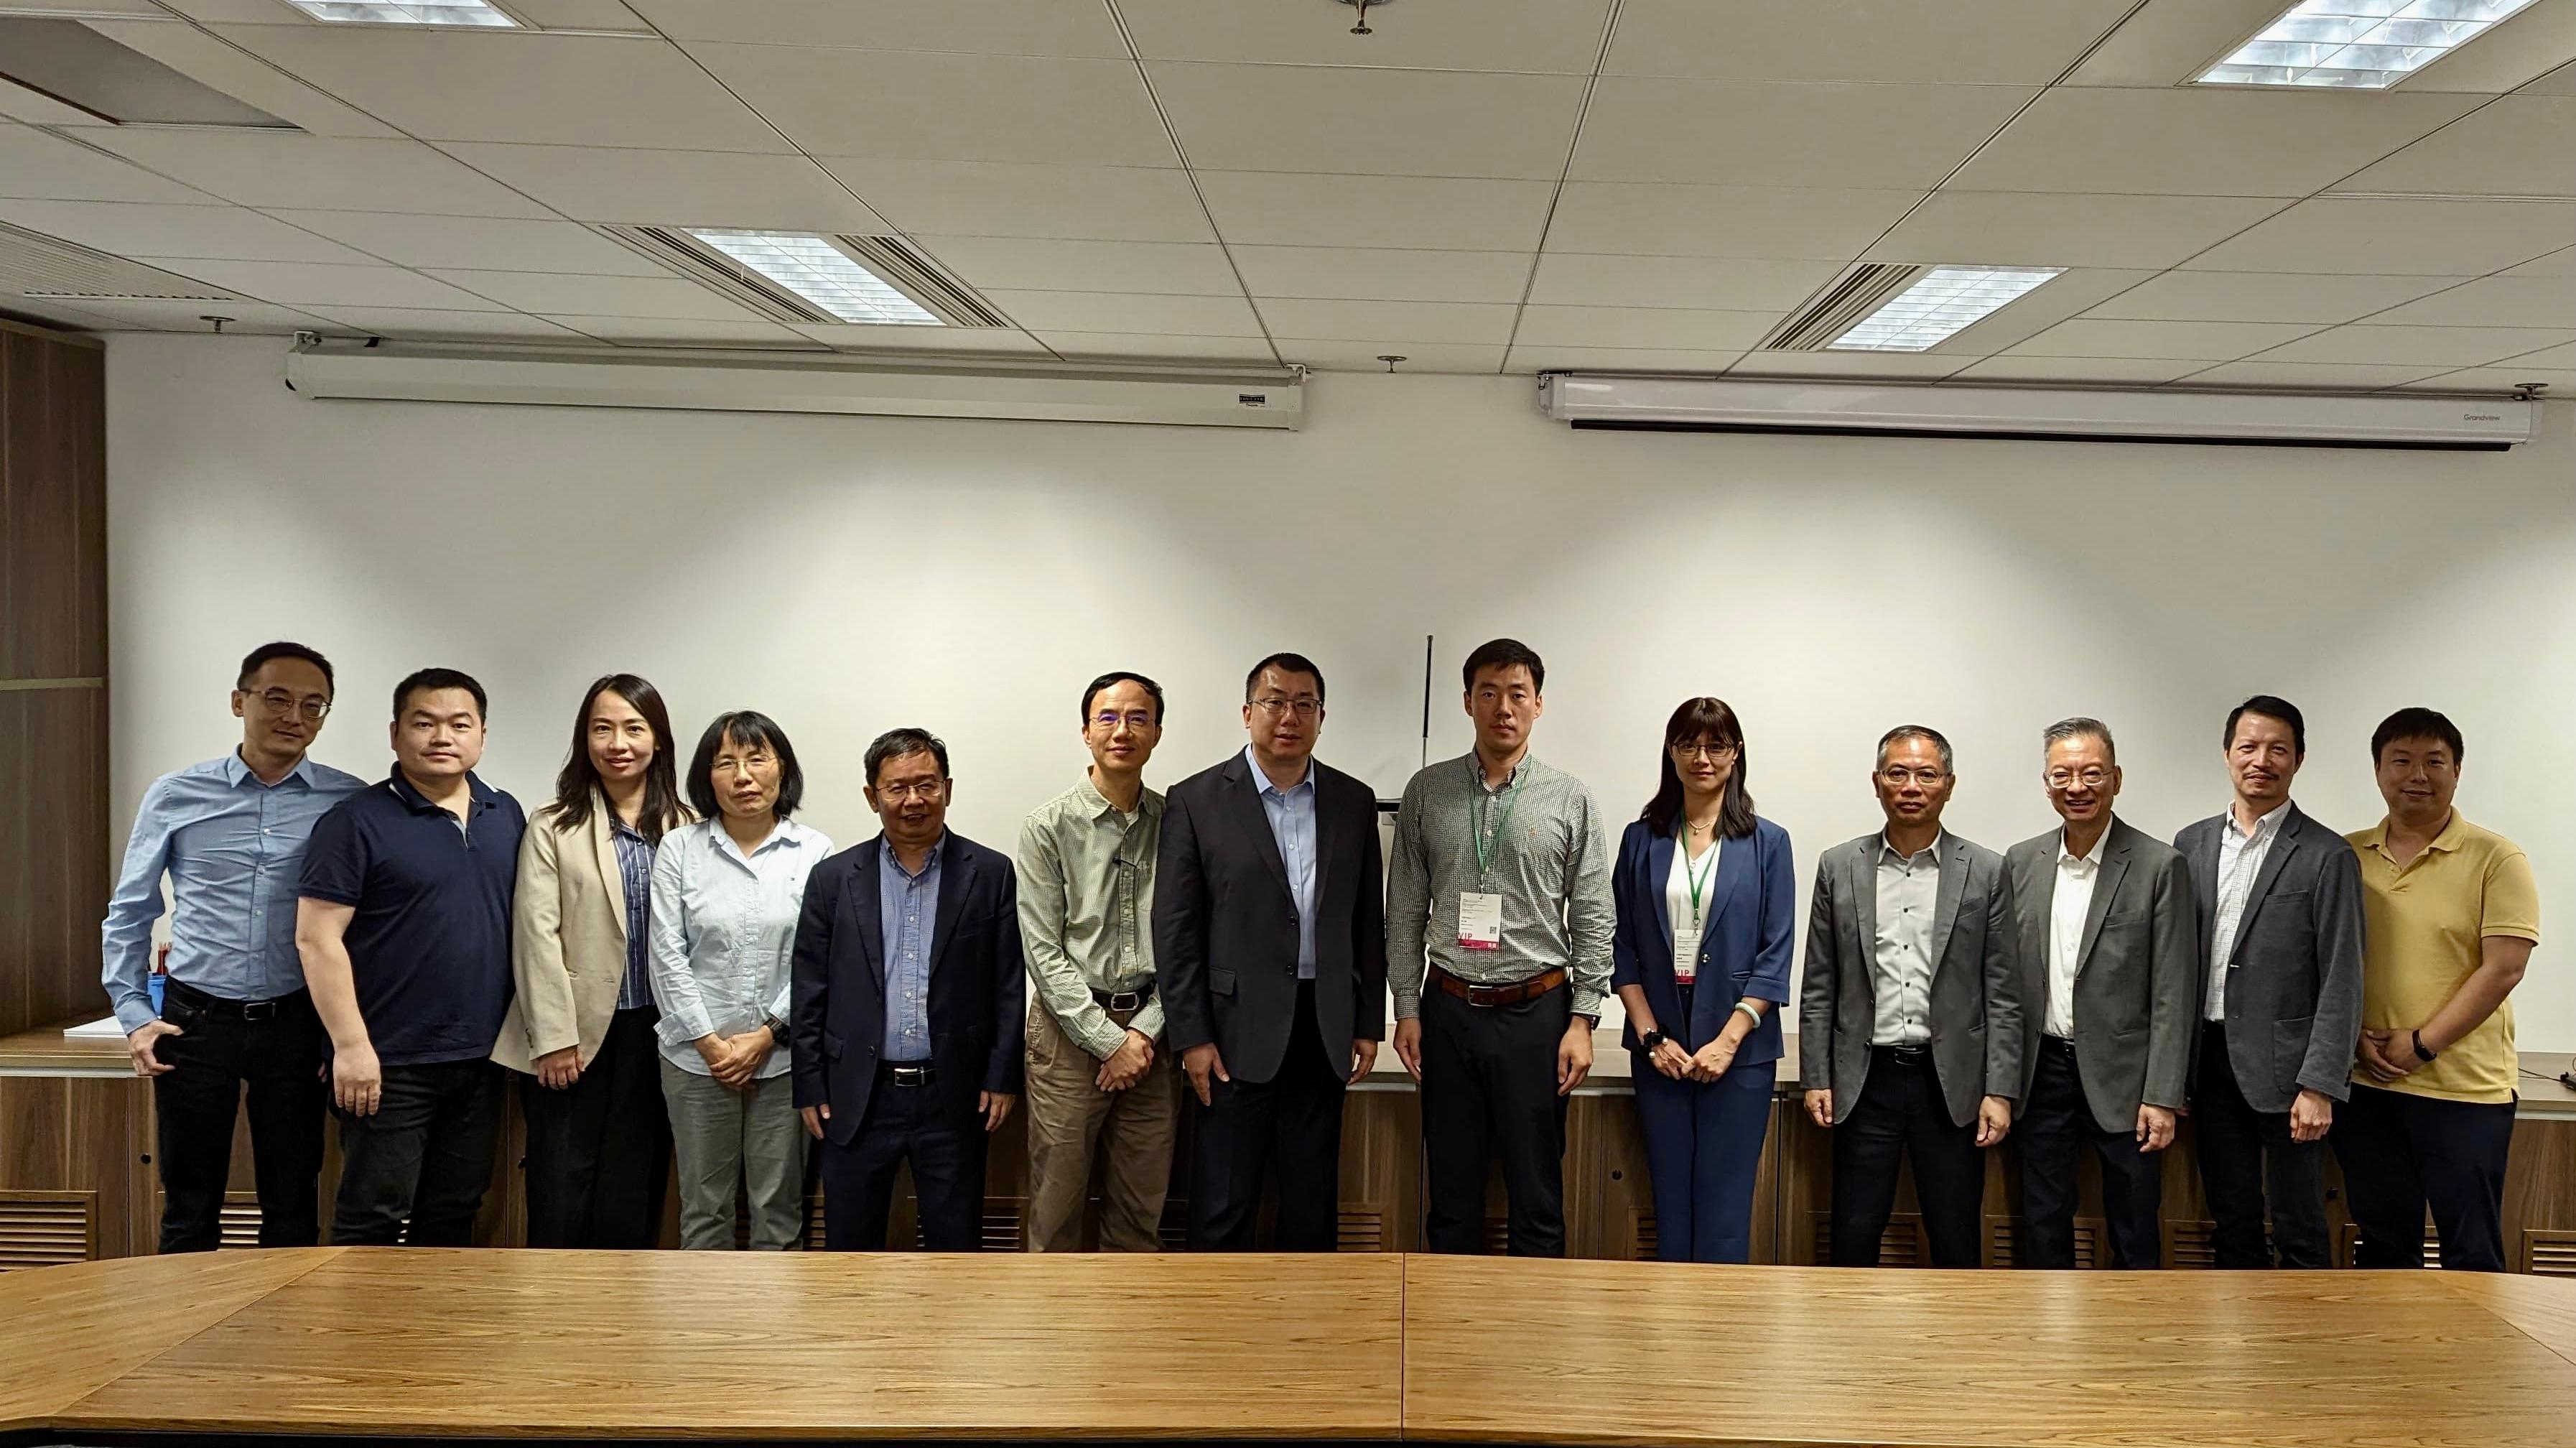 During the visit to Hong Kong, the delegation of the China National Environmental Monitoring Centre of Ministry of Ecology and Environment visited facilities of the Environmental Protection Department (EPD) and the Hong Kong University of Science and Technology (HKUST) to share experiences and exchange views. Photo shows representatives of the China National Environmental Monitoring Centre with officers of the EPD and the HKUST.